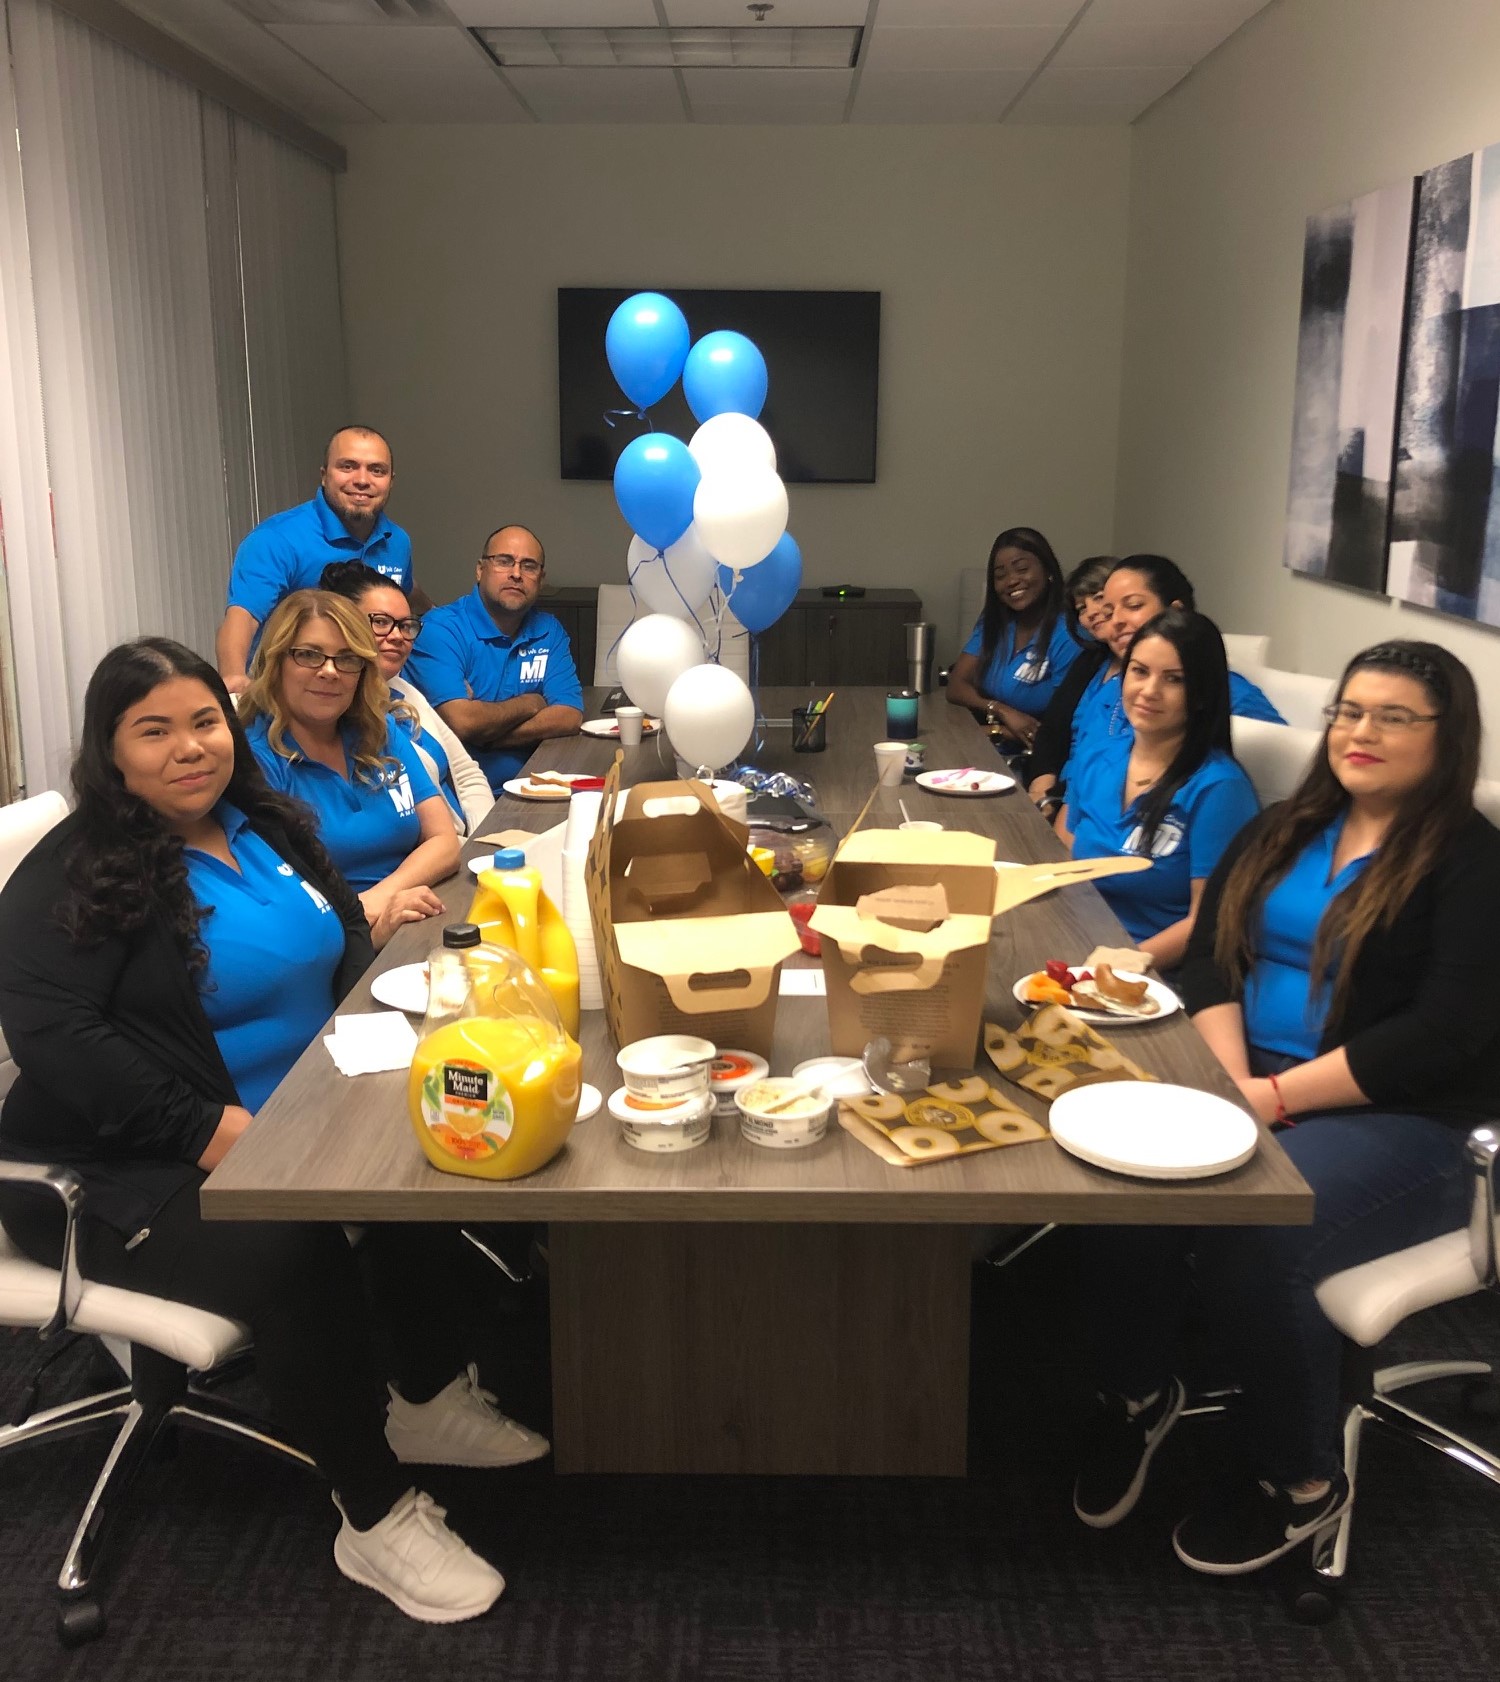 Arizona office welcomes We Care program roll out.